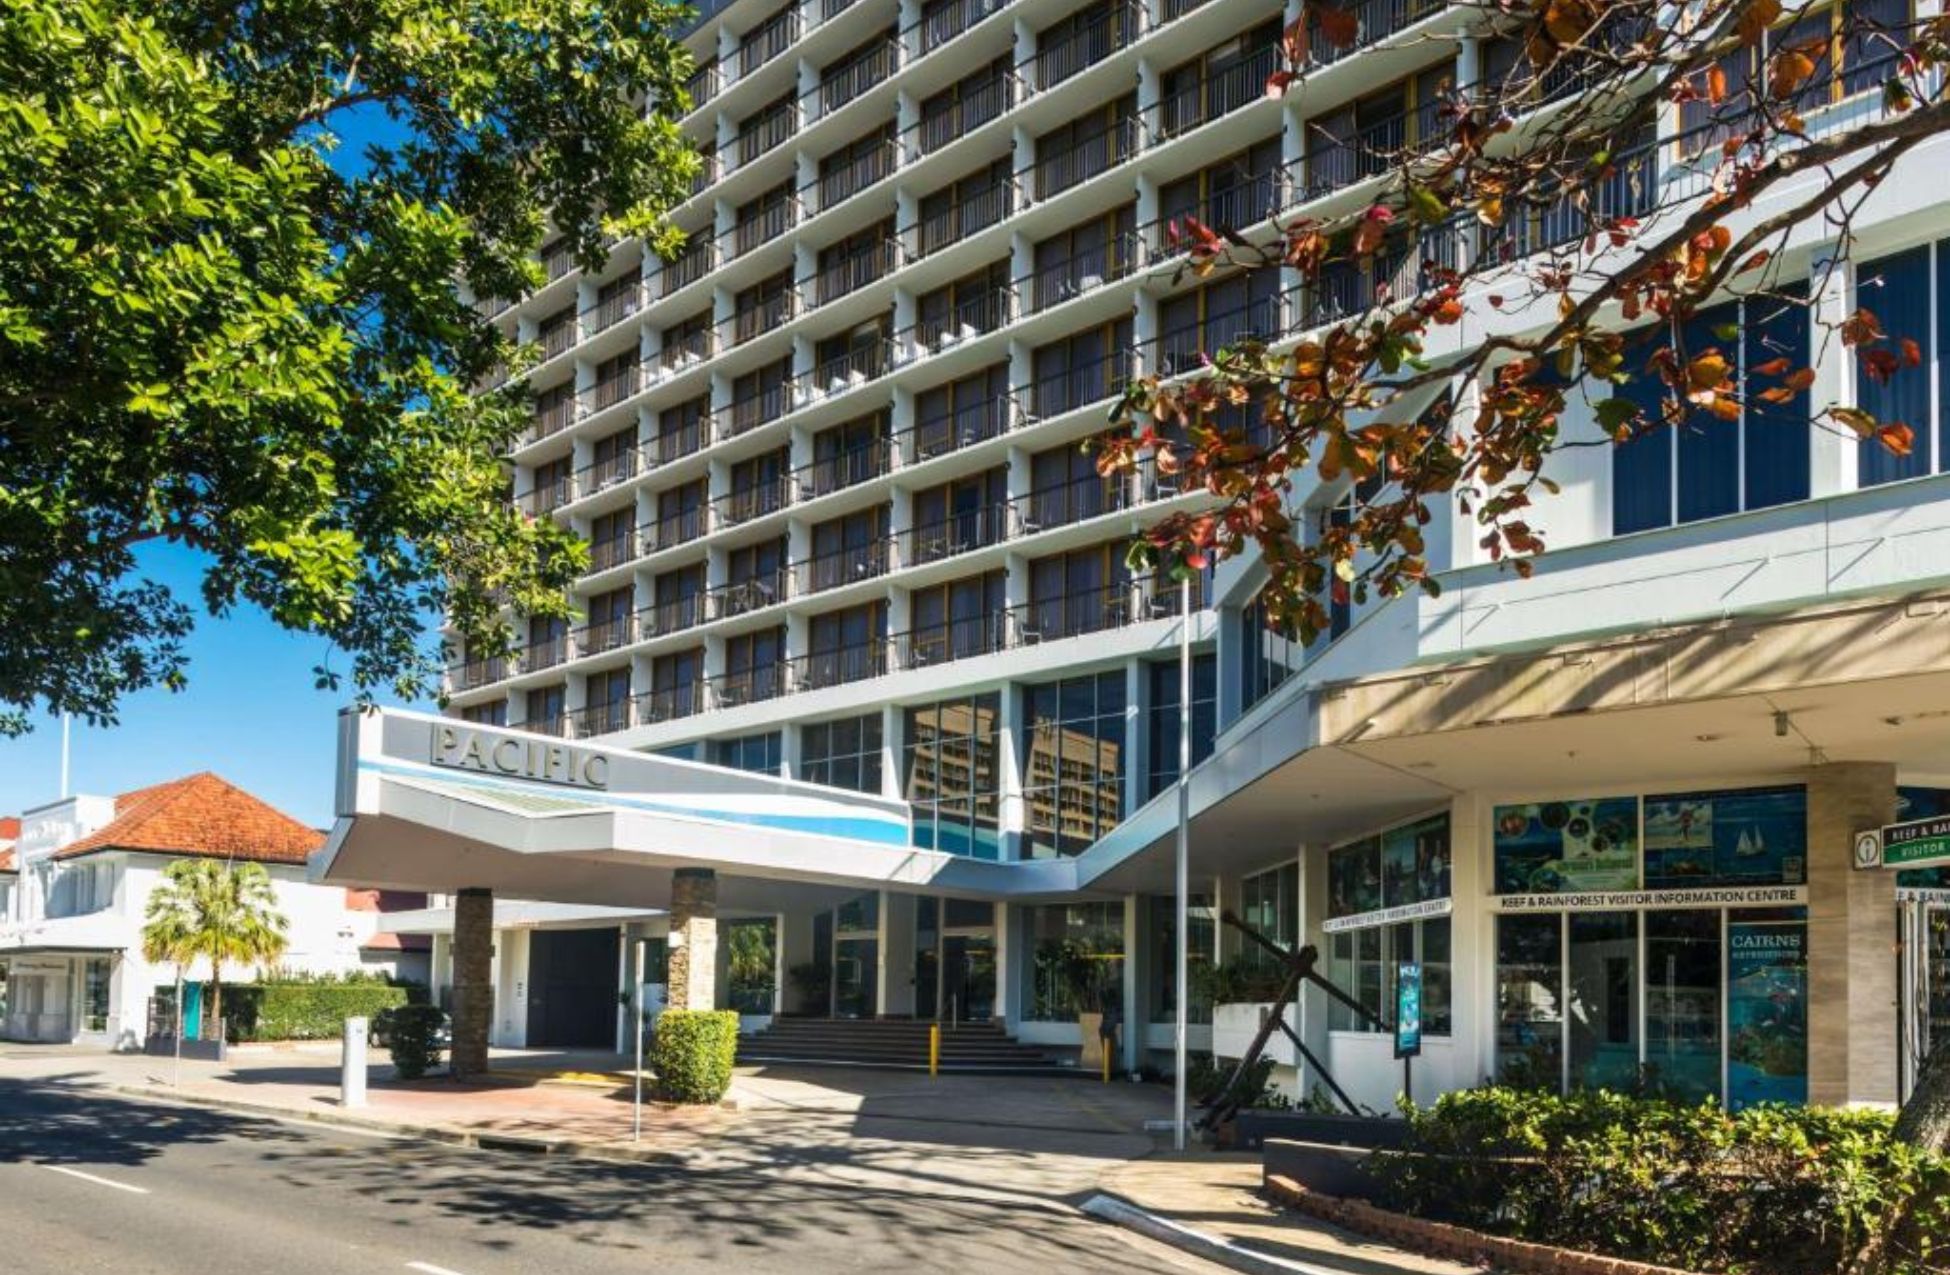 Pacific Hotel Cairns - Best Hotels In Cairns